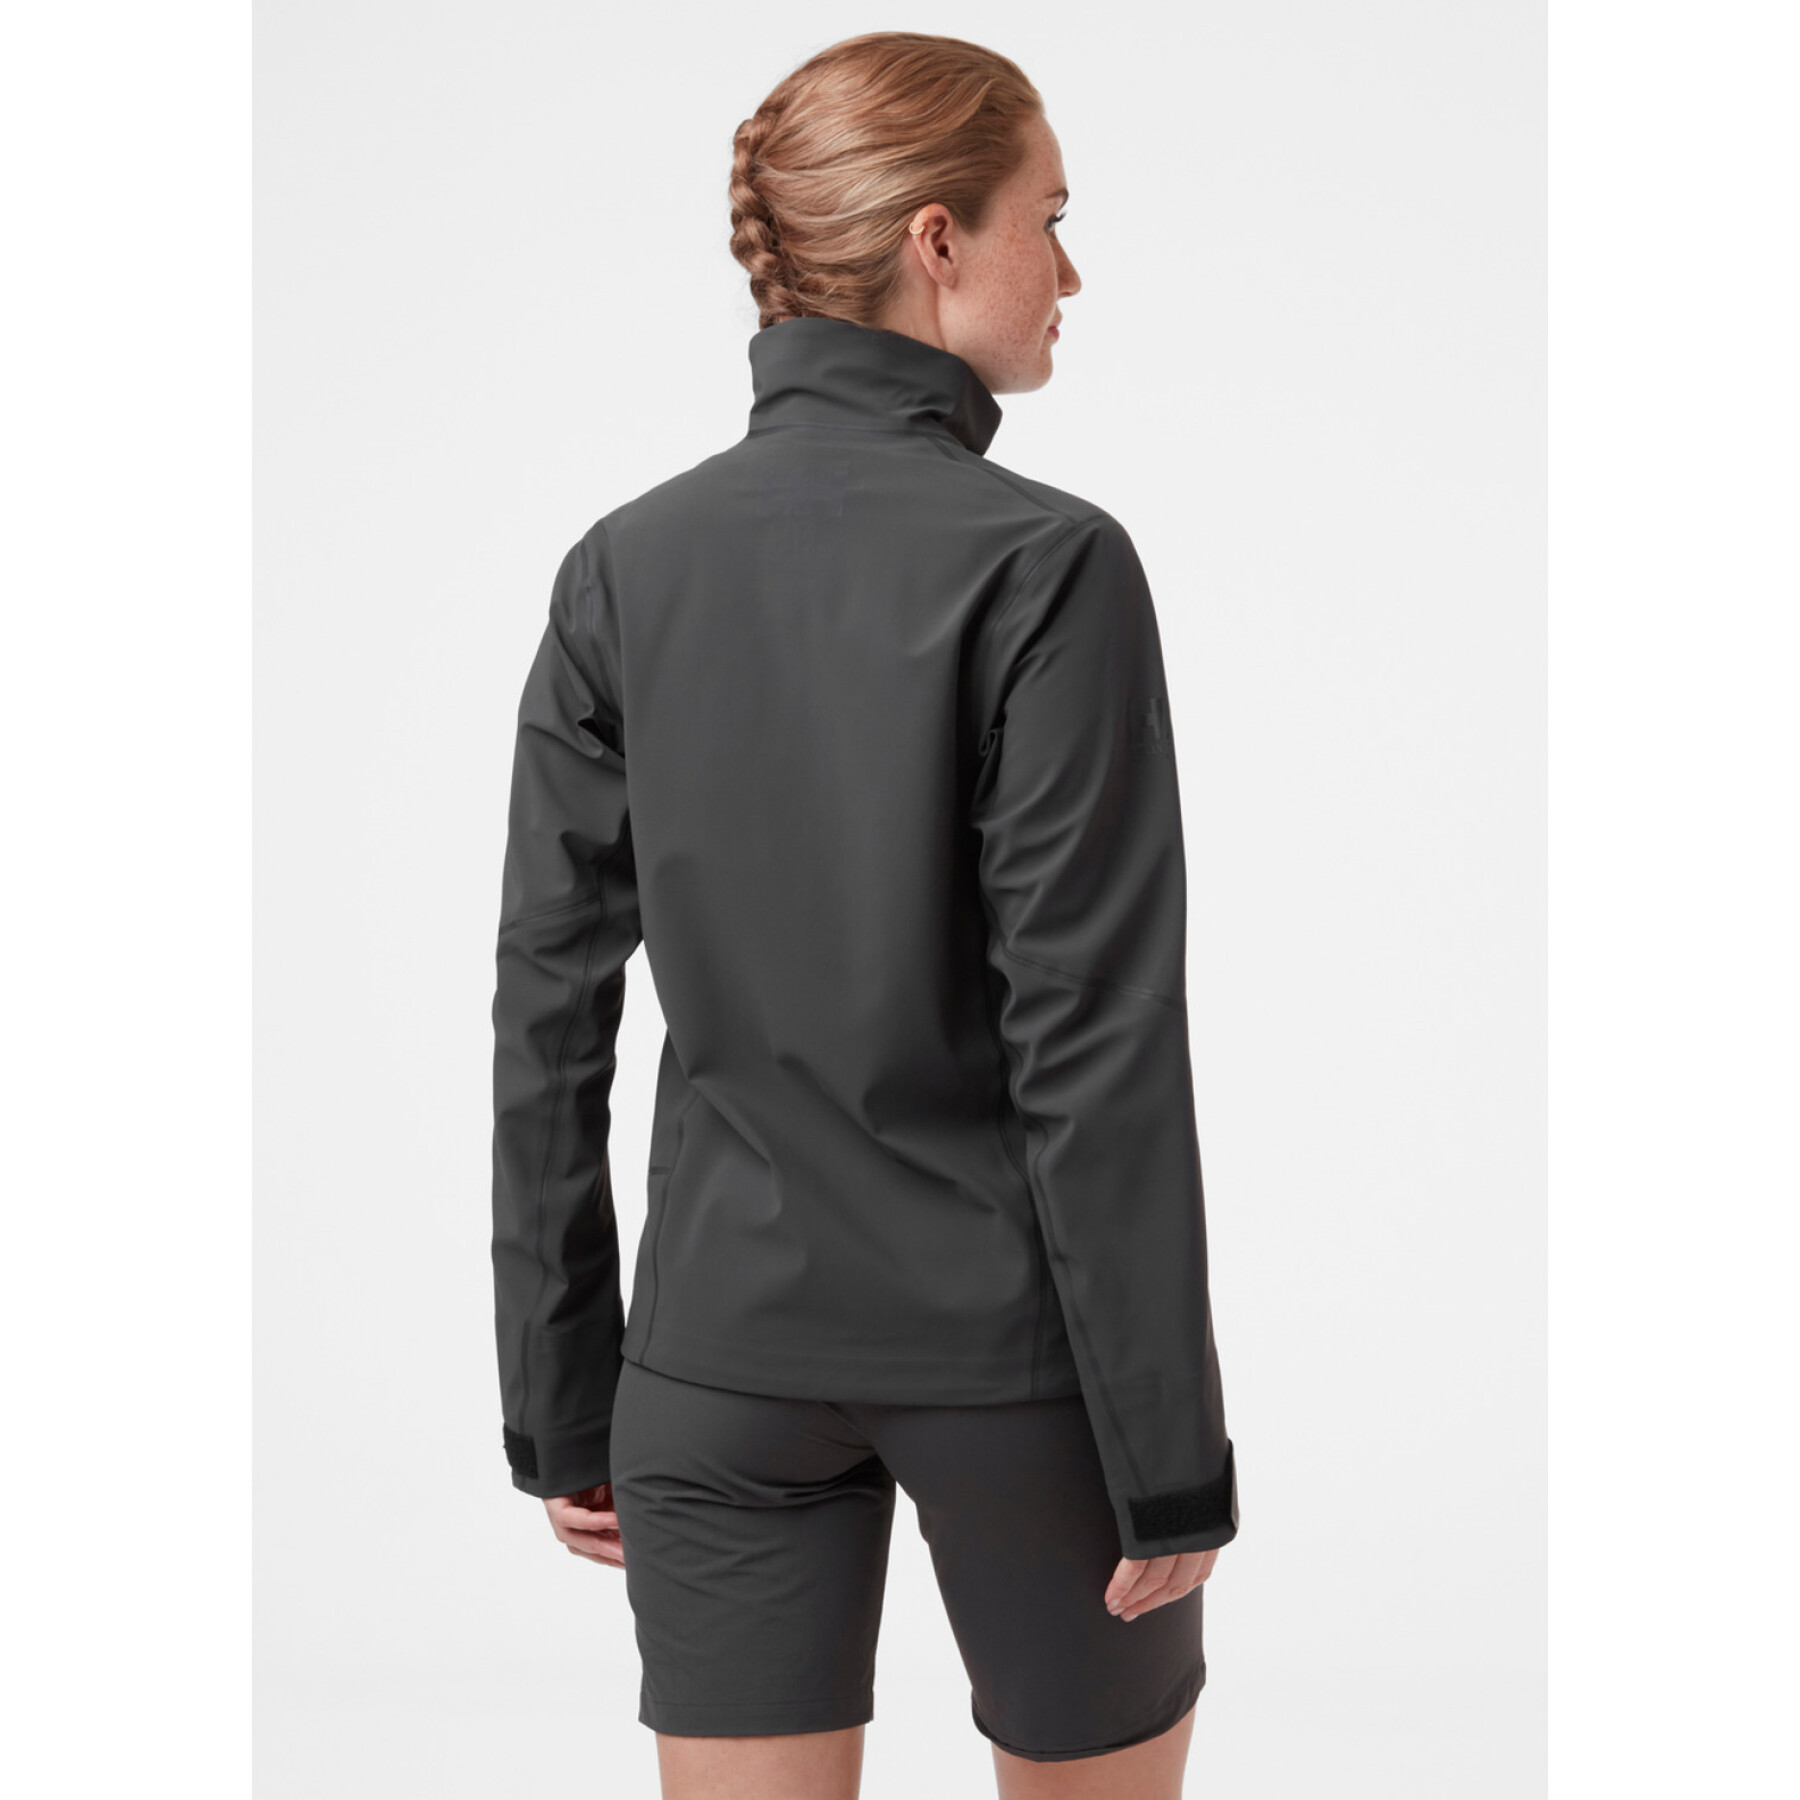 Chaqueta impermeable softshell mujer Helly Hansen Foil Pro